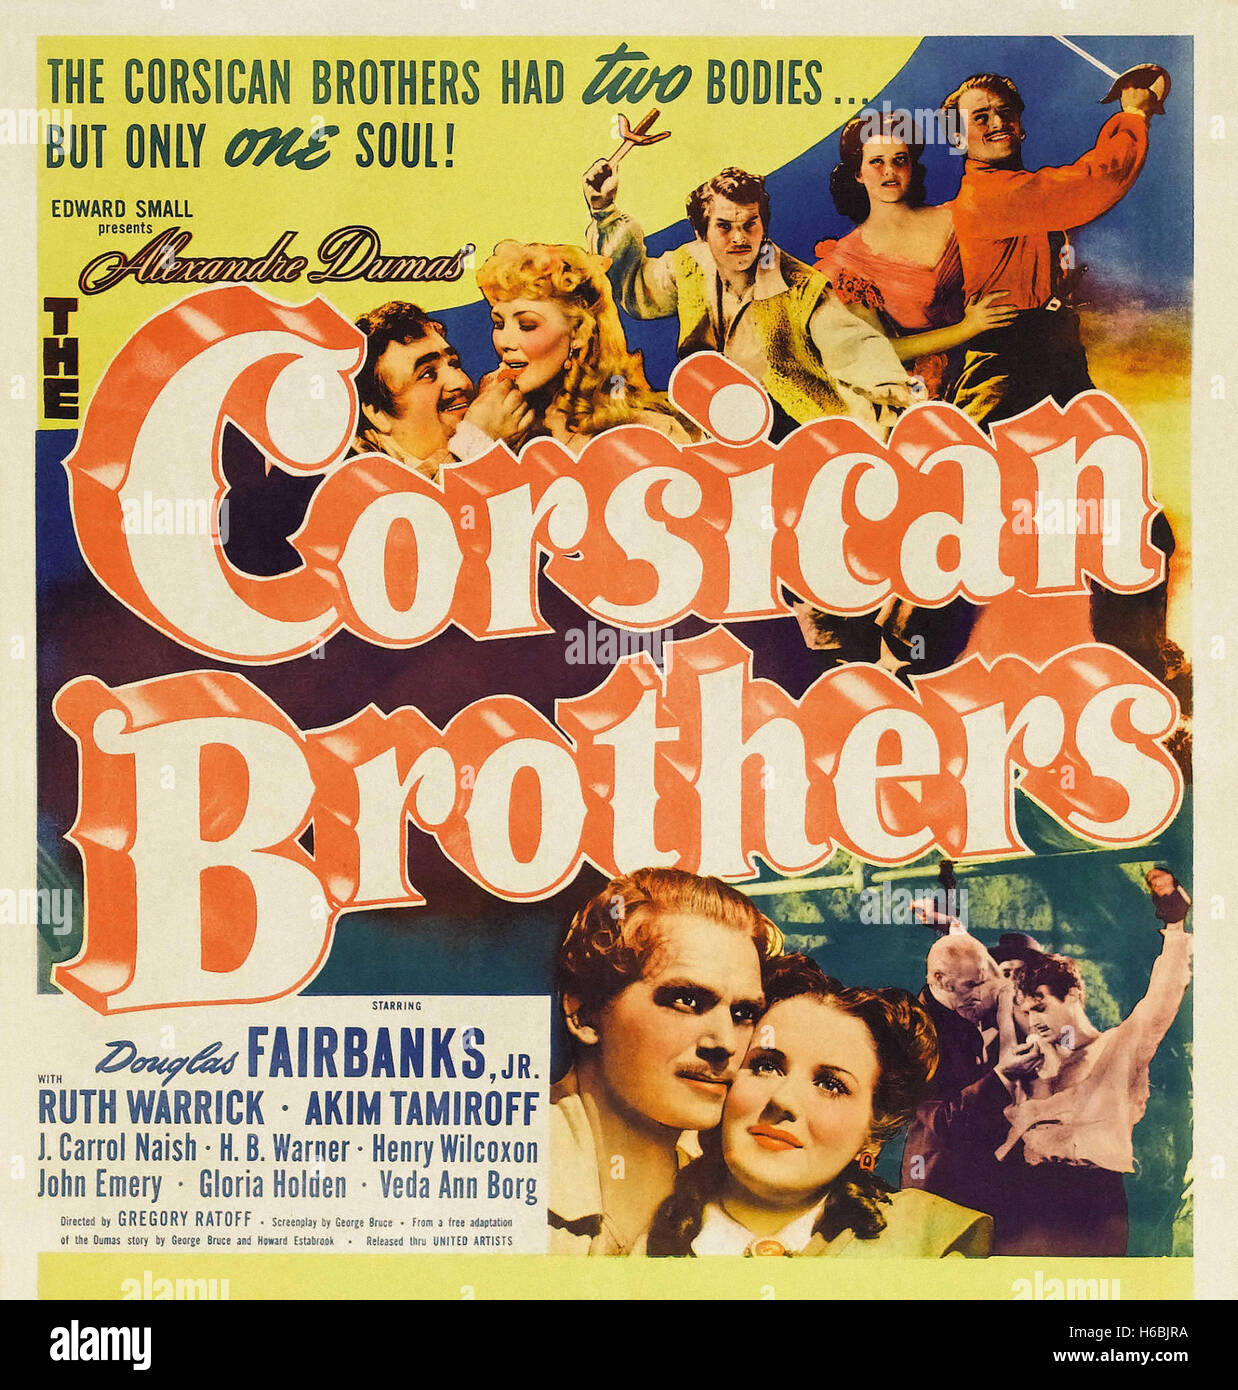 The Corsican Brothers,(1941)  - Movie Poster - Stock Photo